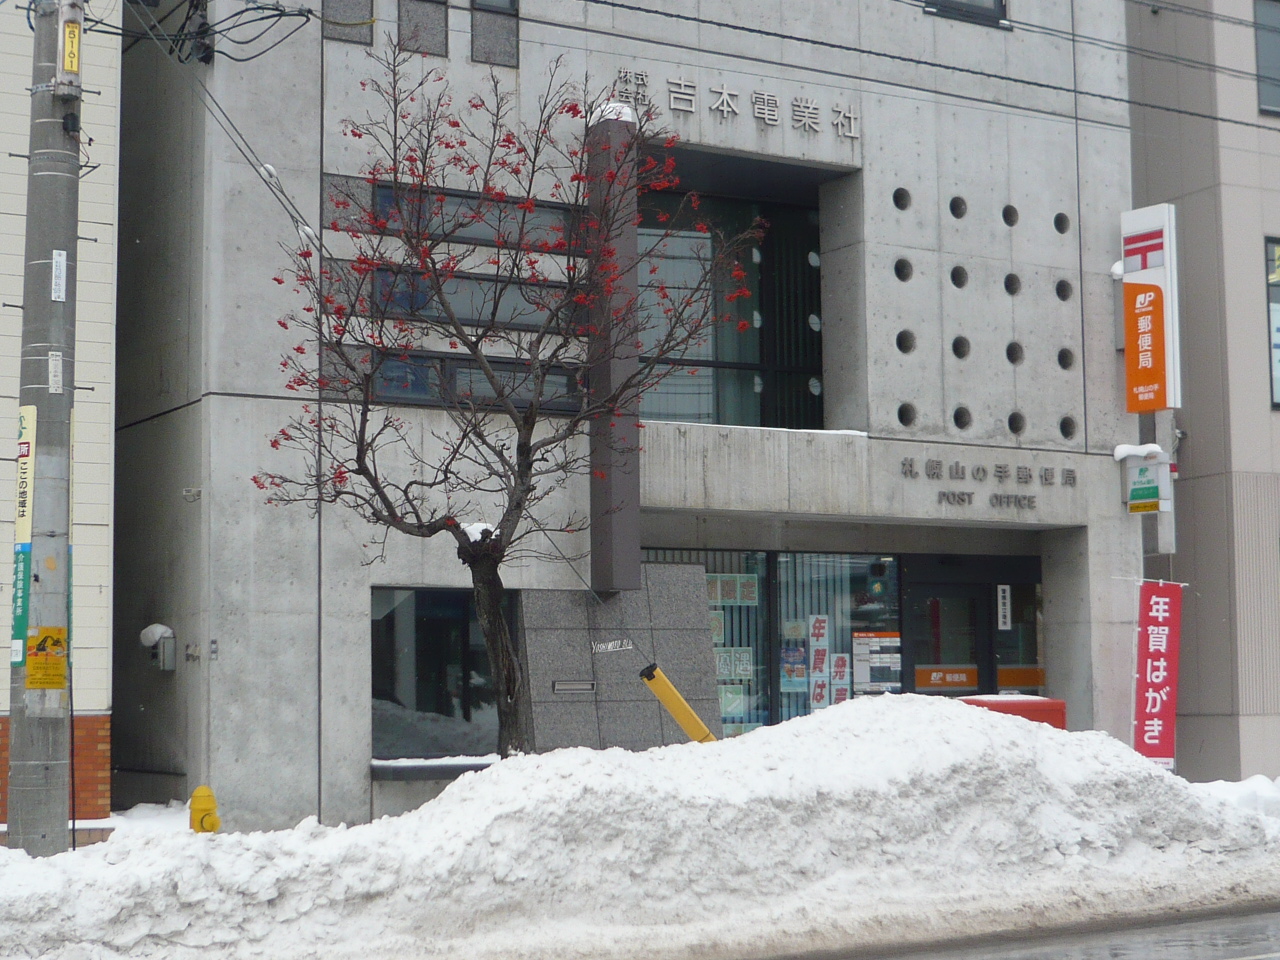 post office. 914m to Sapporo uptown post office (post office)